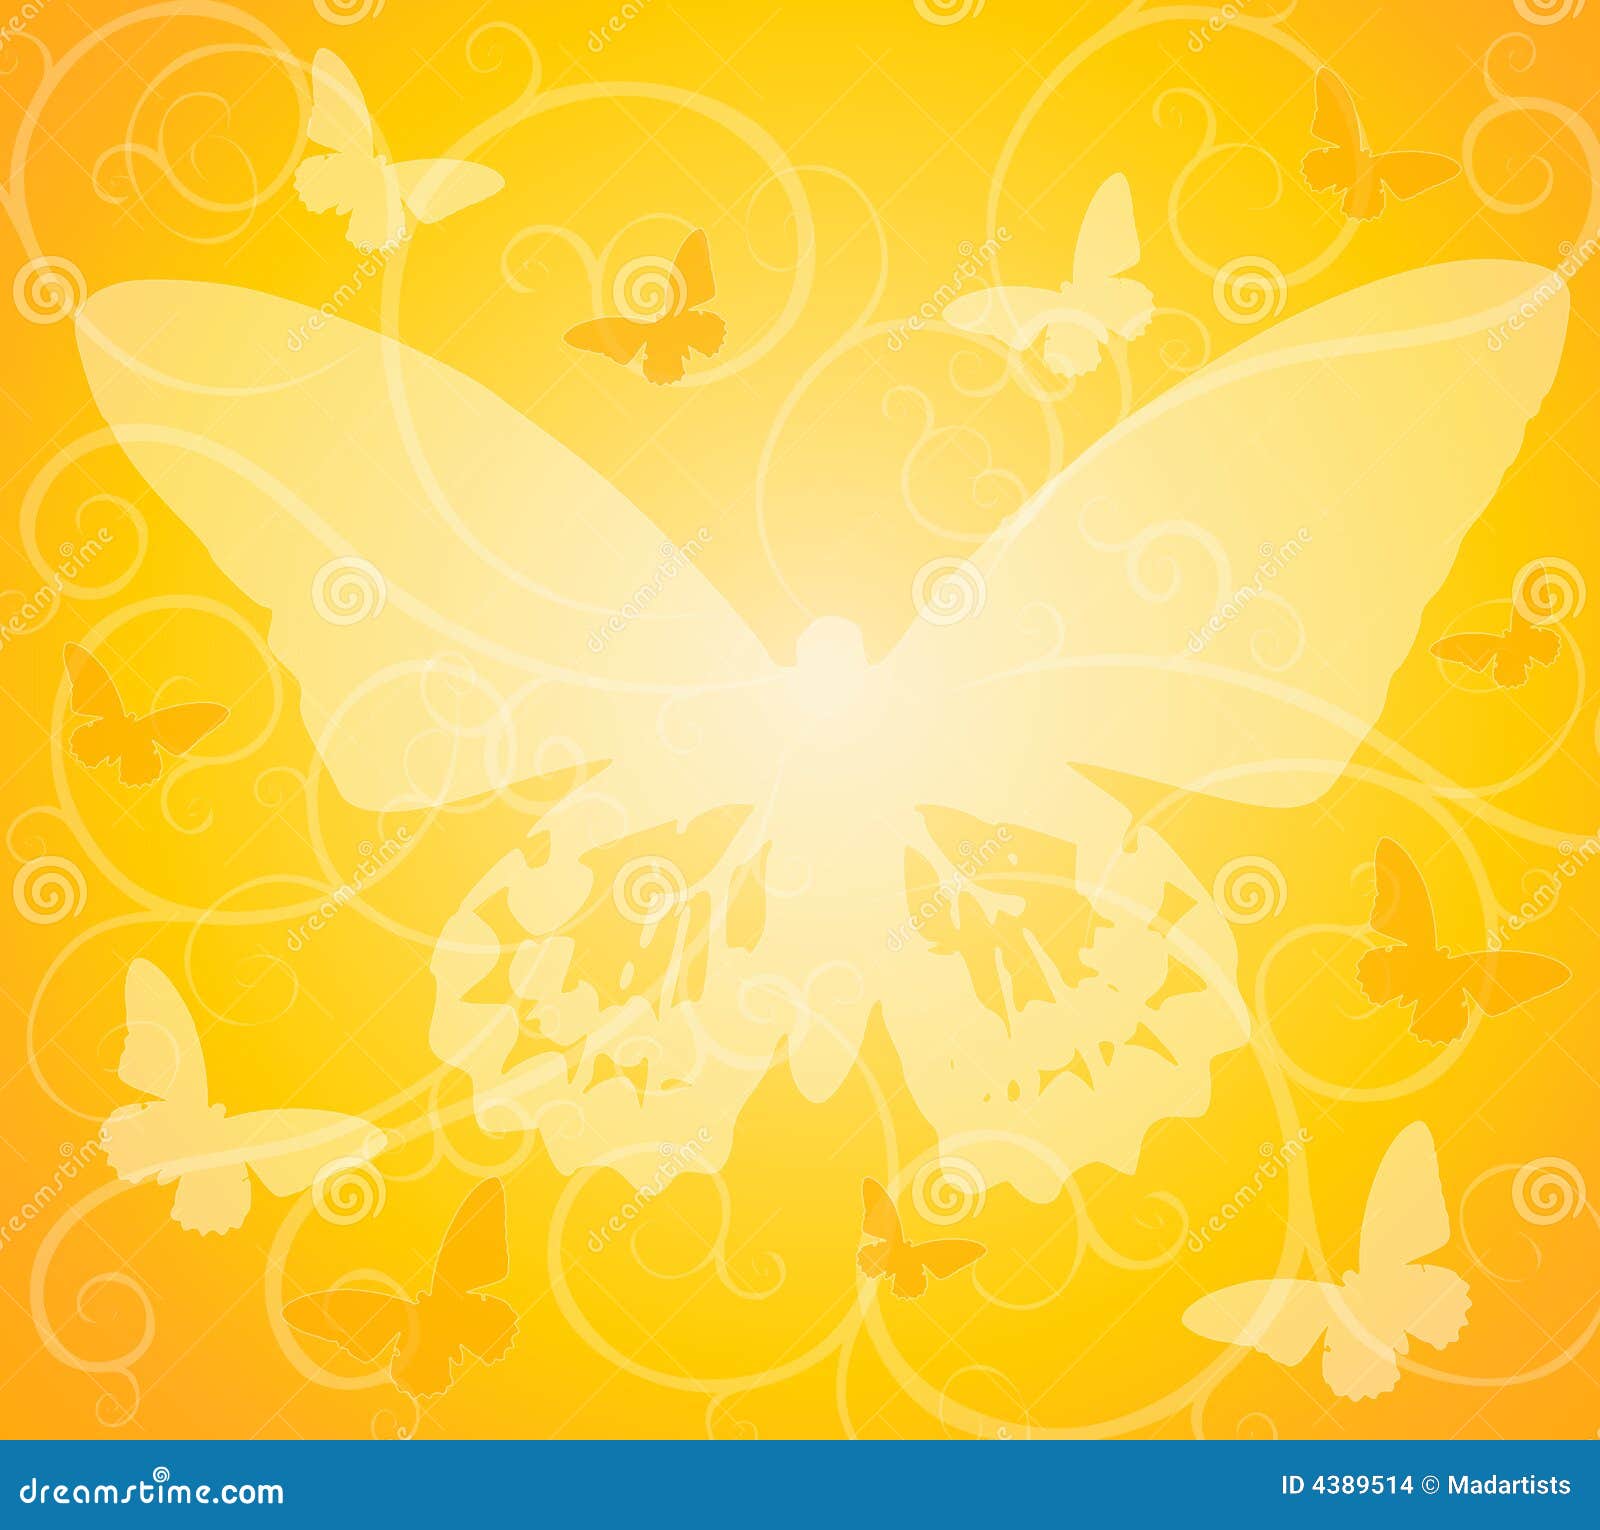 gold opaque butterfly background